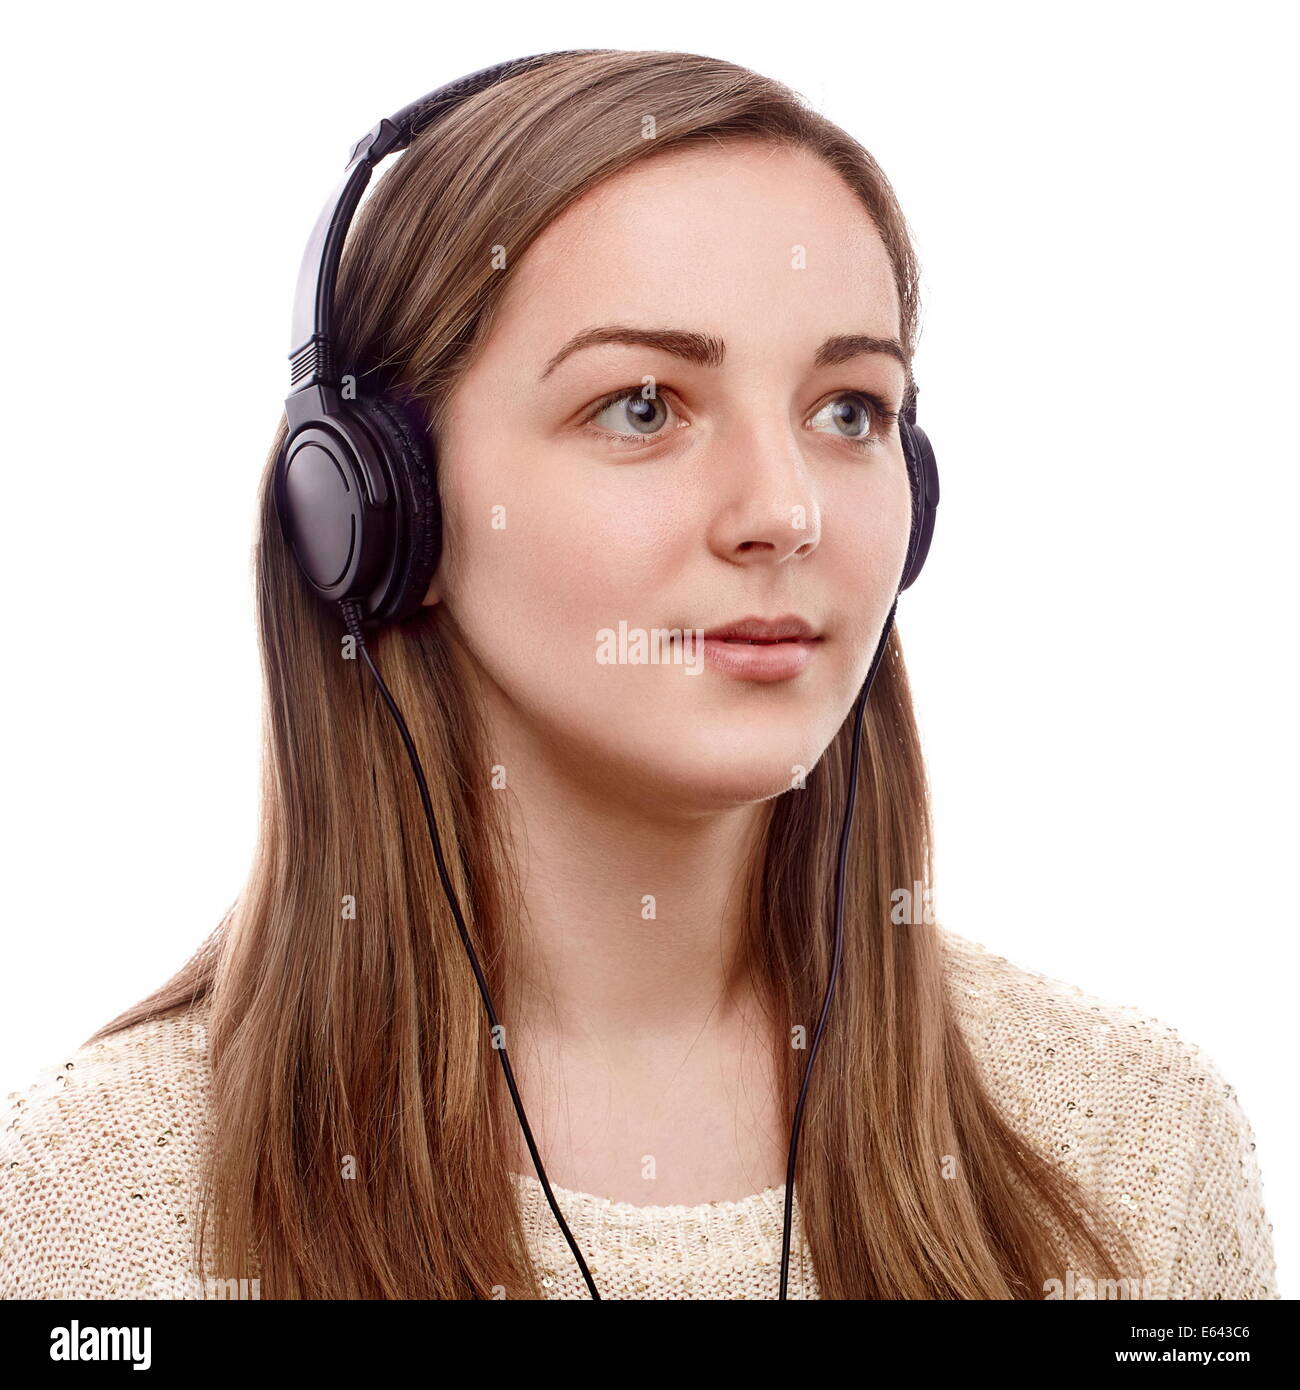 Young woman listening to the music on headphones Stock Photo